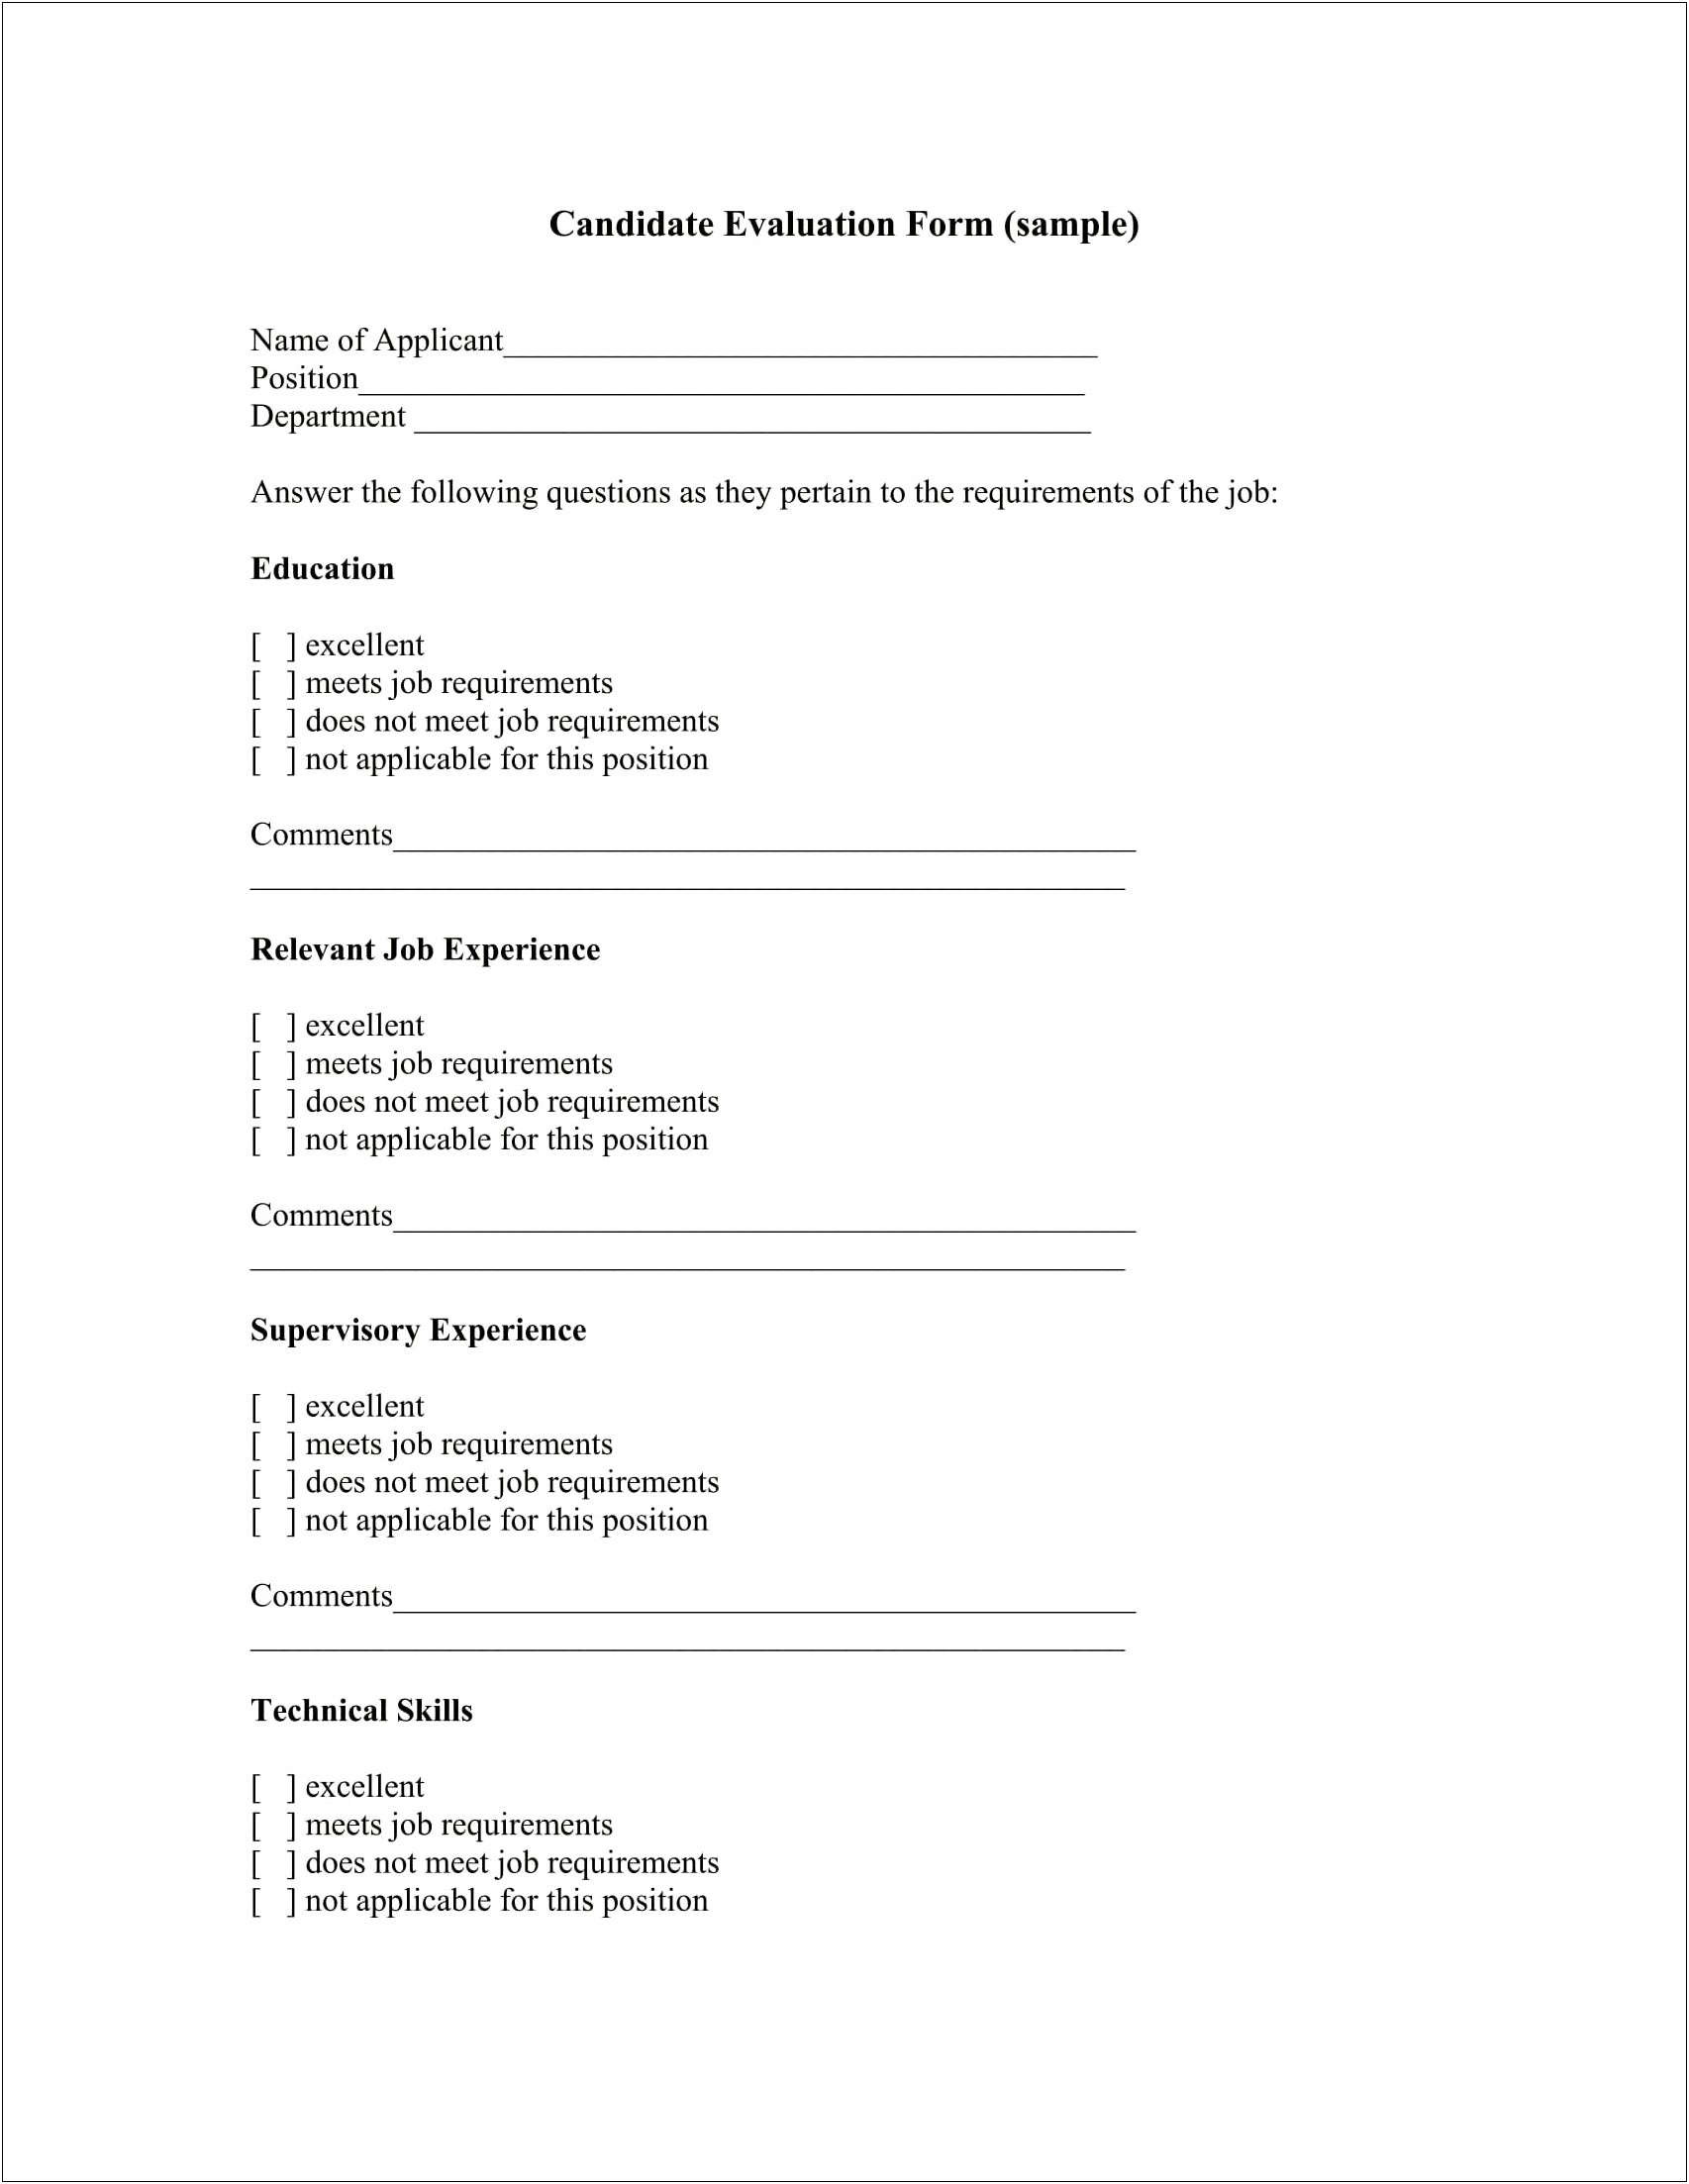 Free Resume And Cover Letter Evaluation